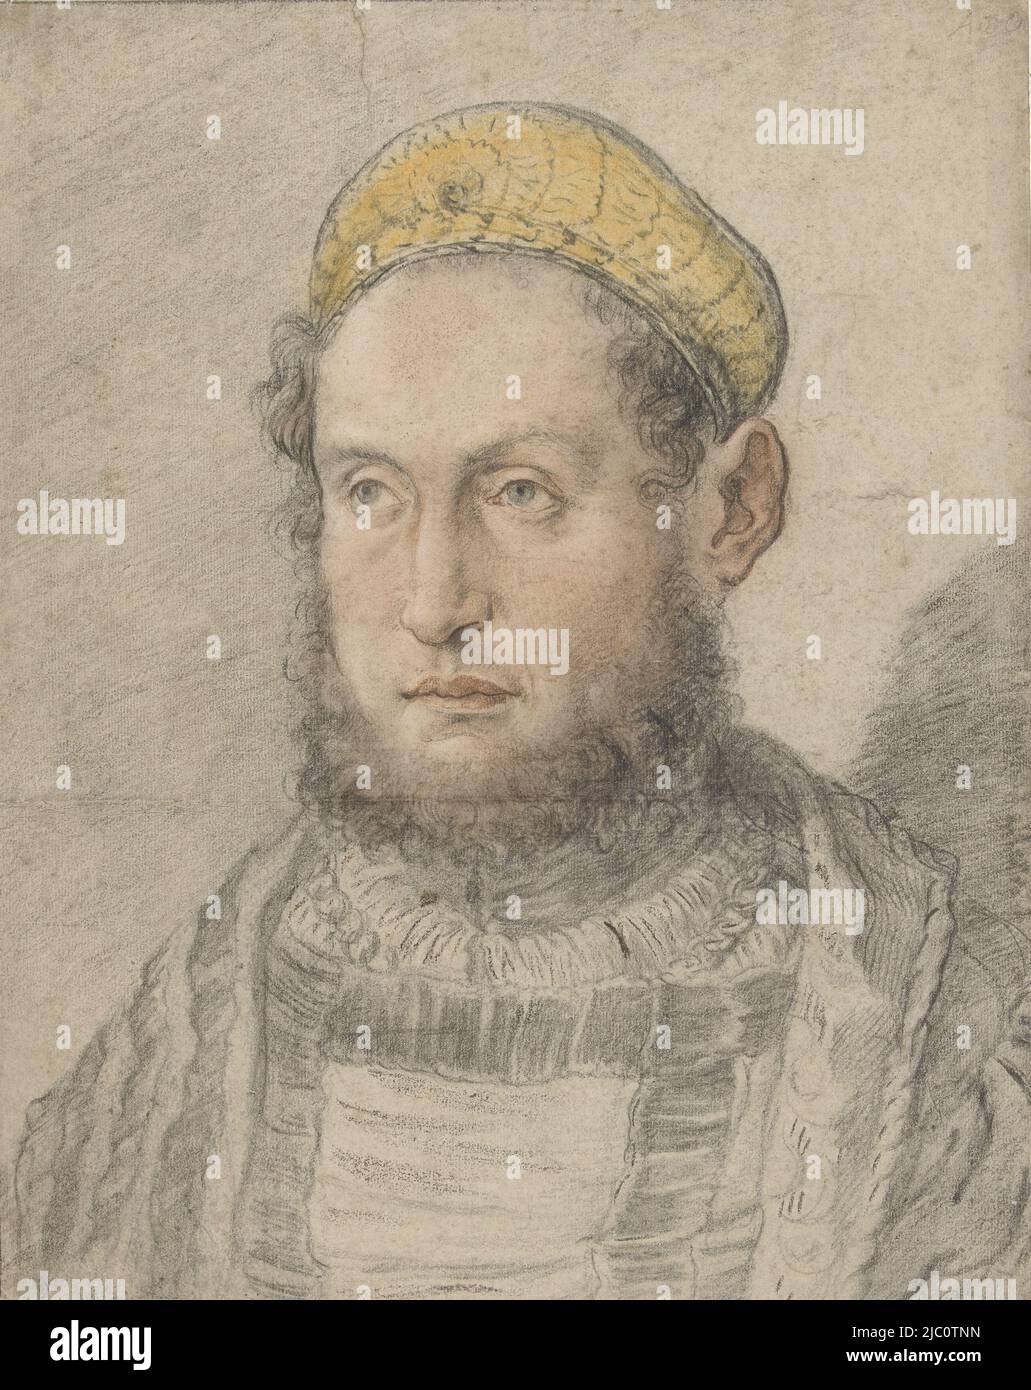 Portrait of a prominent man with beard and gold coloured hat, draughtsman: Hans Burgkmair (I), c. 1505 - c. 1507, paper, h 336 mm × w 270 mm Stock Photo